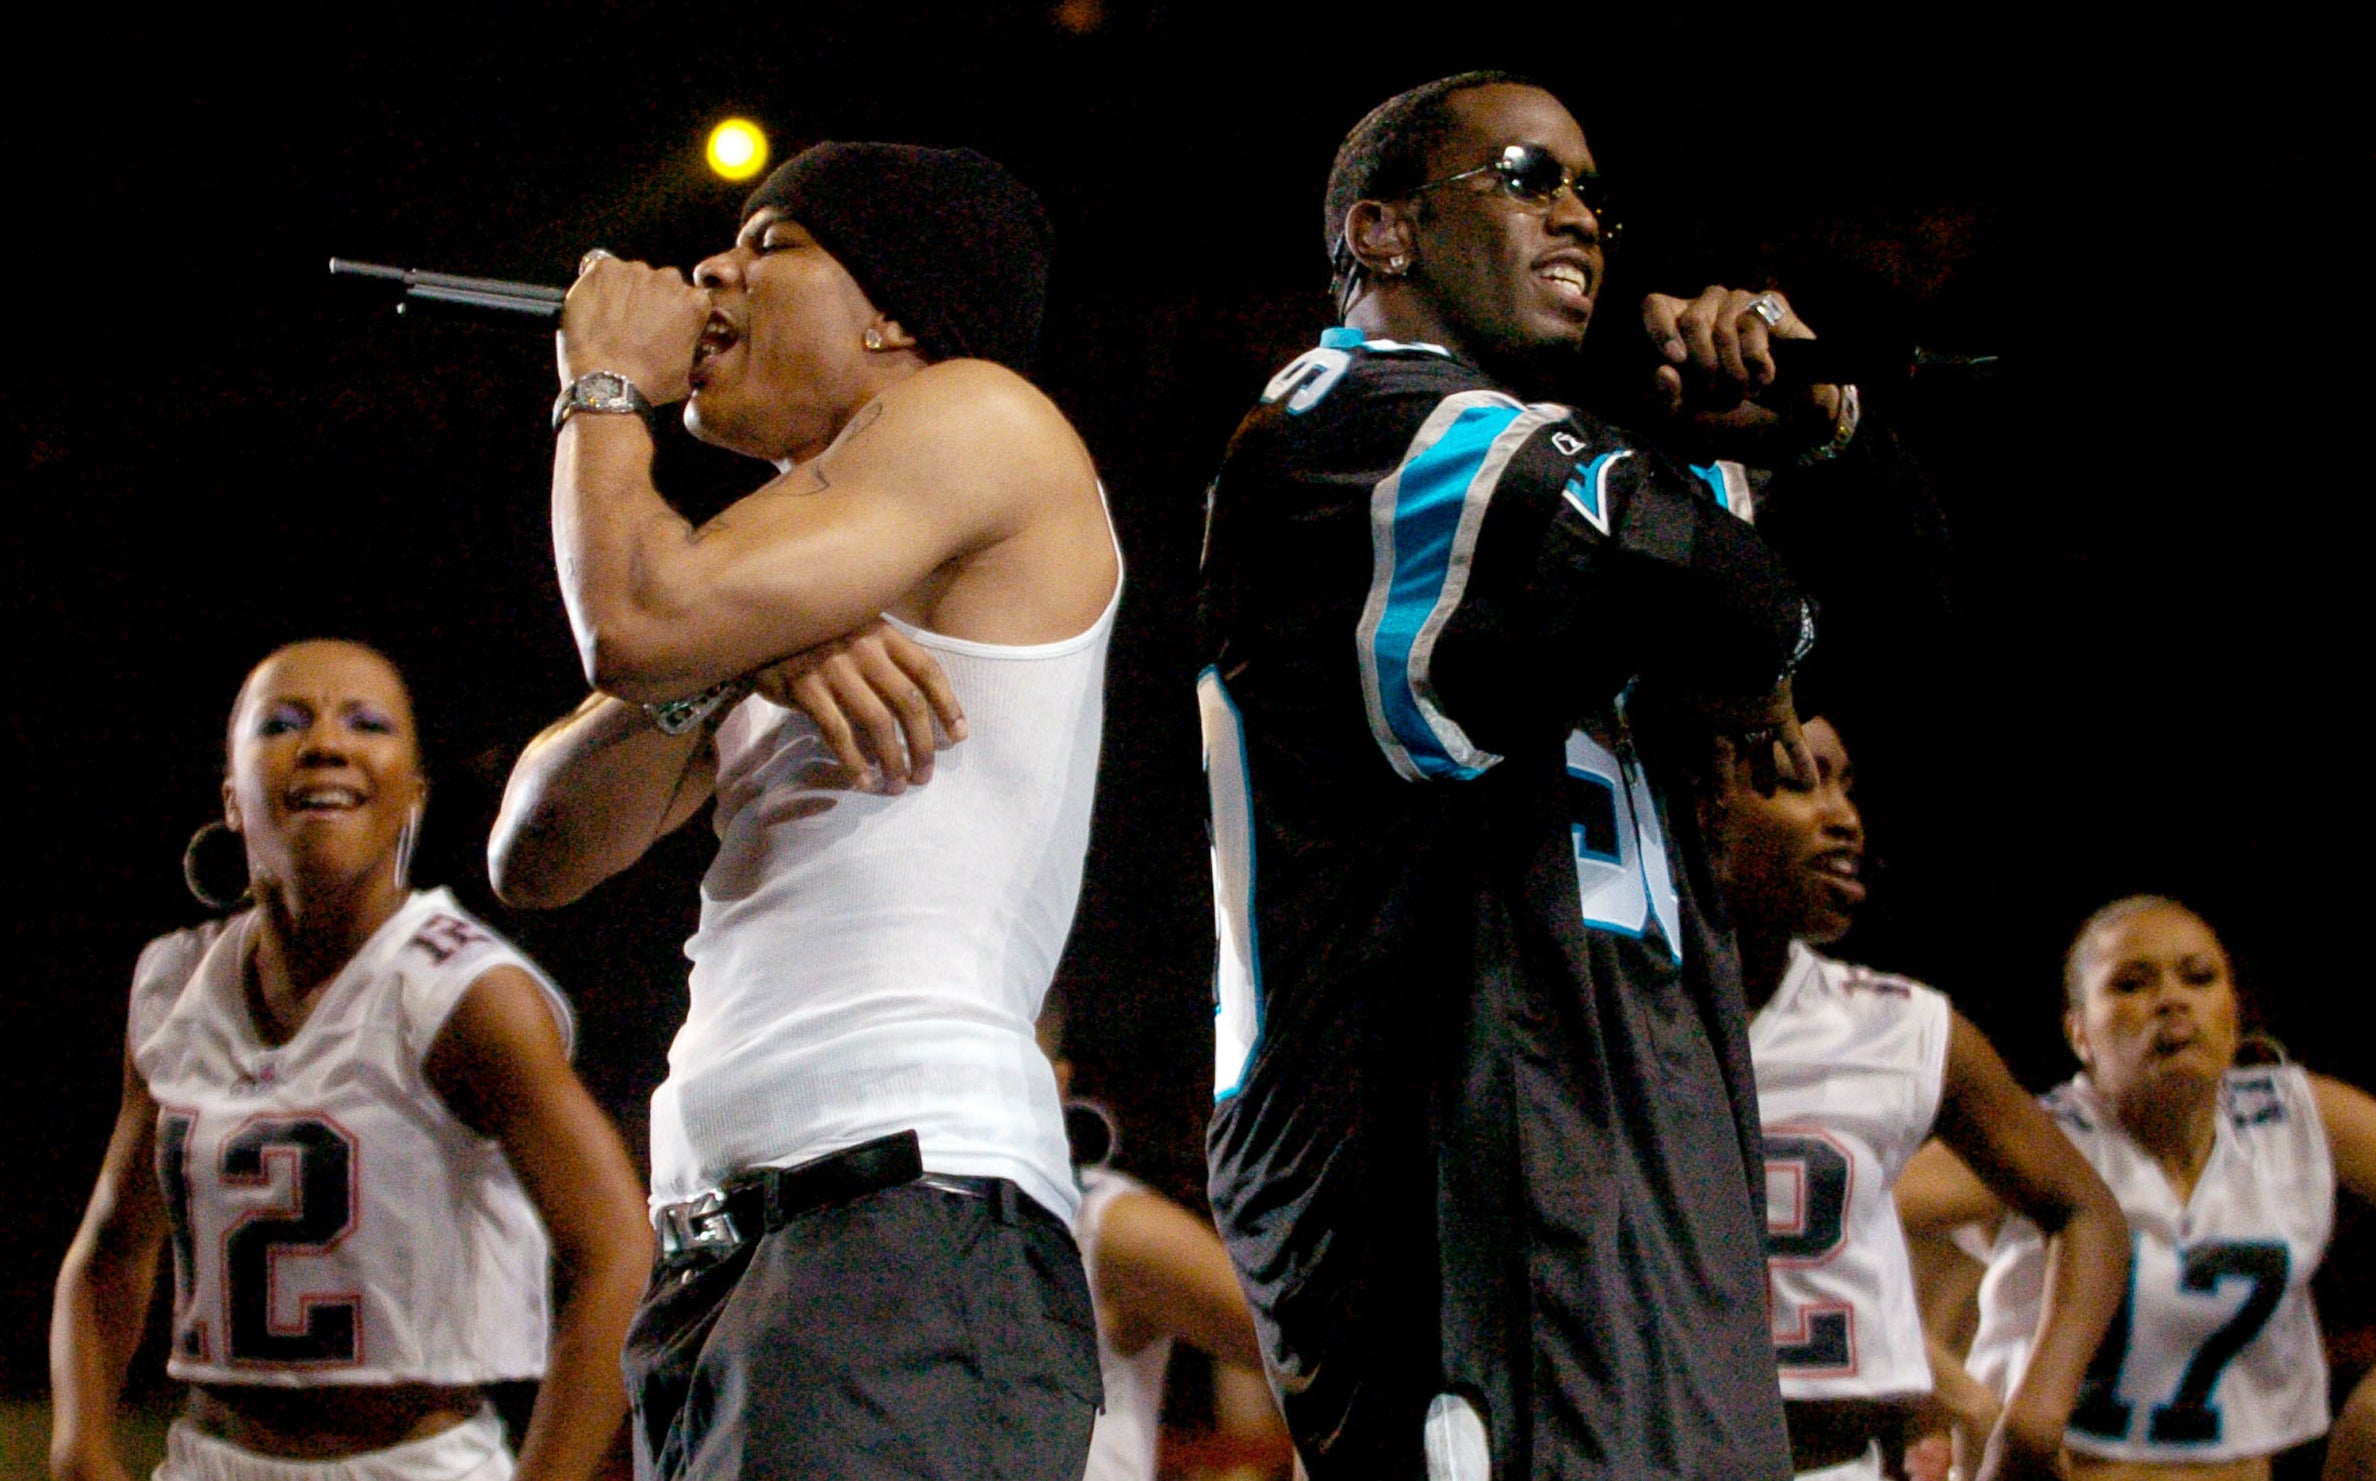 Nelly and Sean P. Diddy Combs during Super Bowl XXXVIII Halftime Show